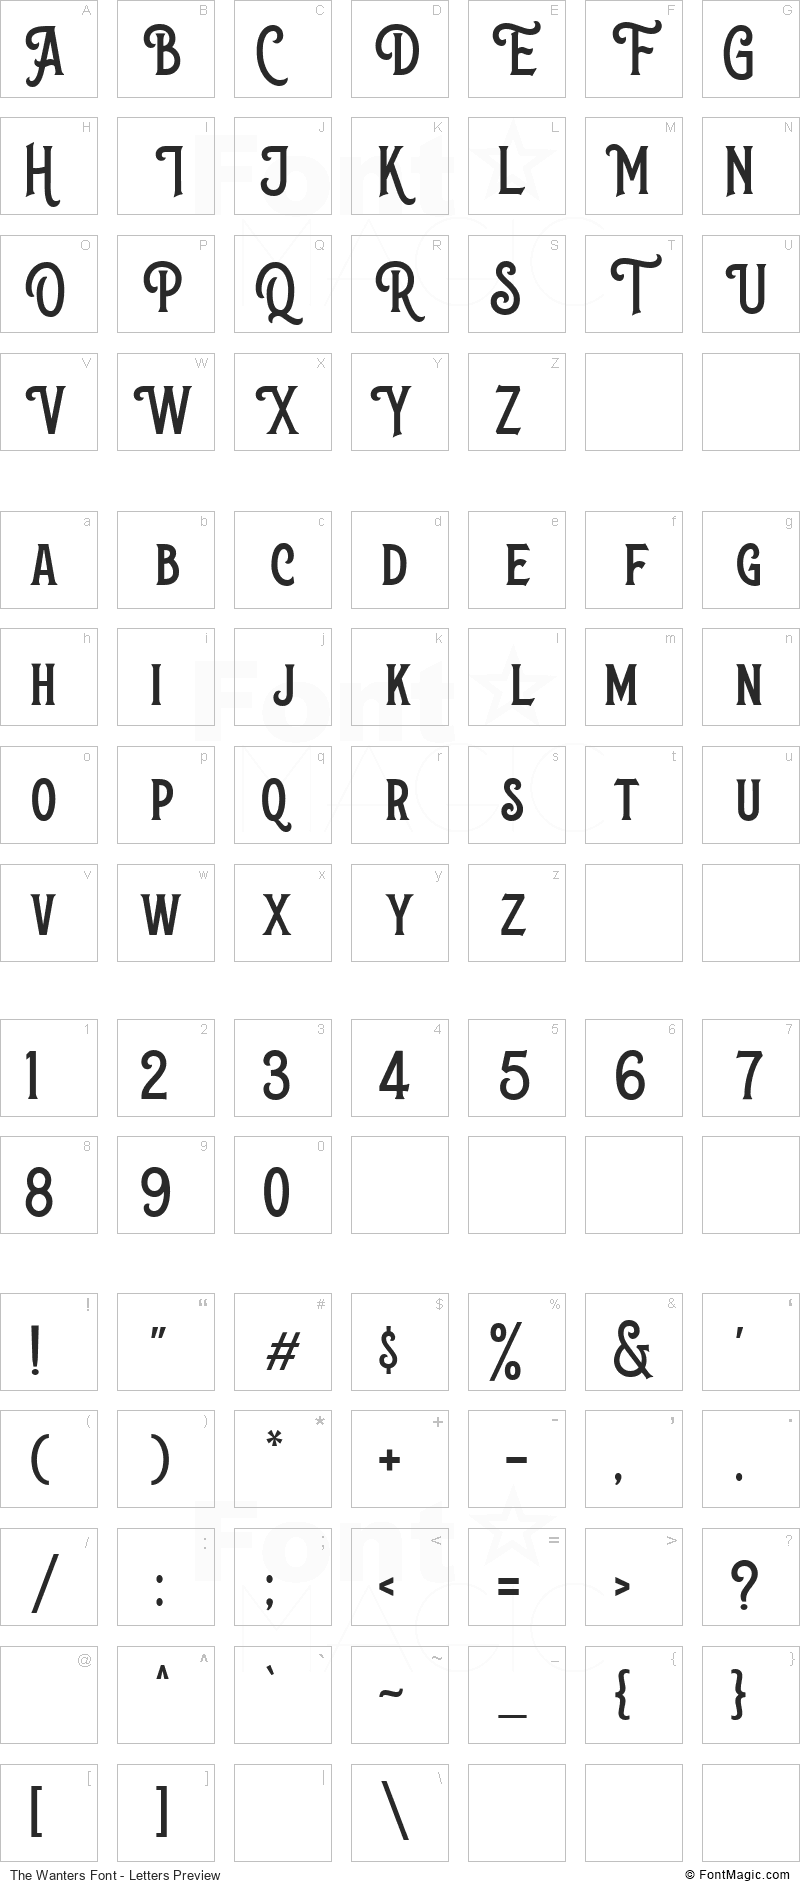 The Wanters Font - All Latters Preview Chart